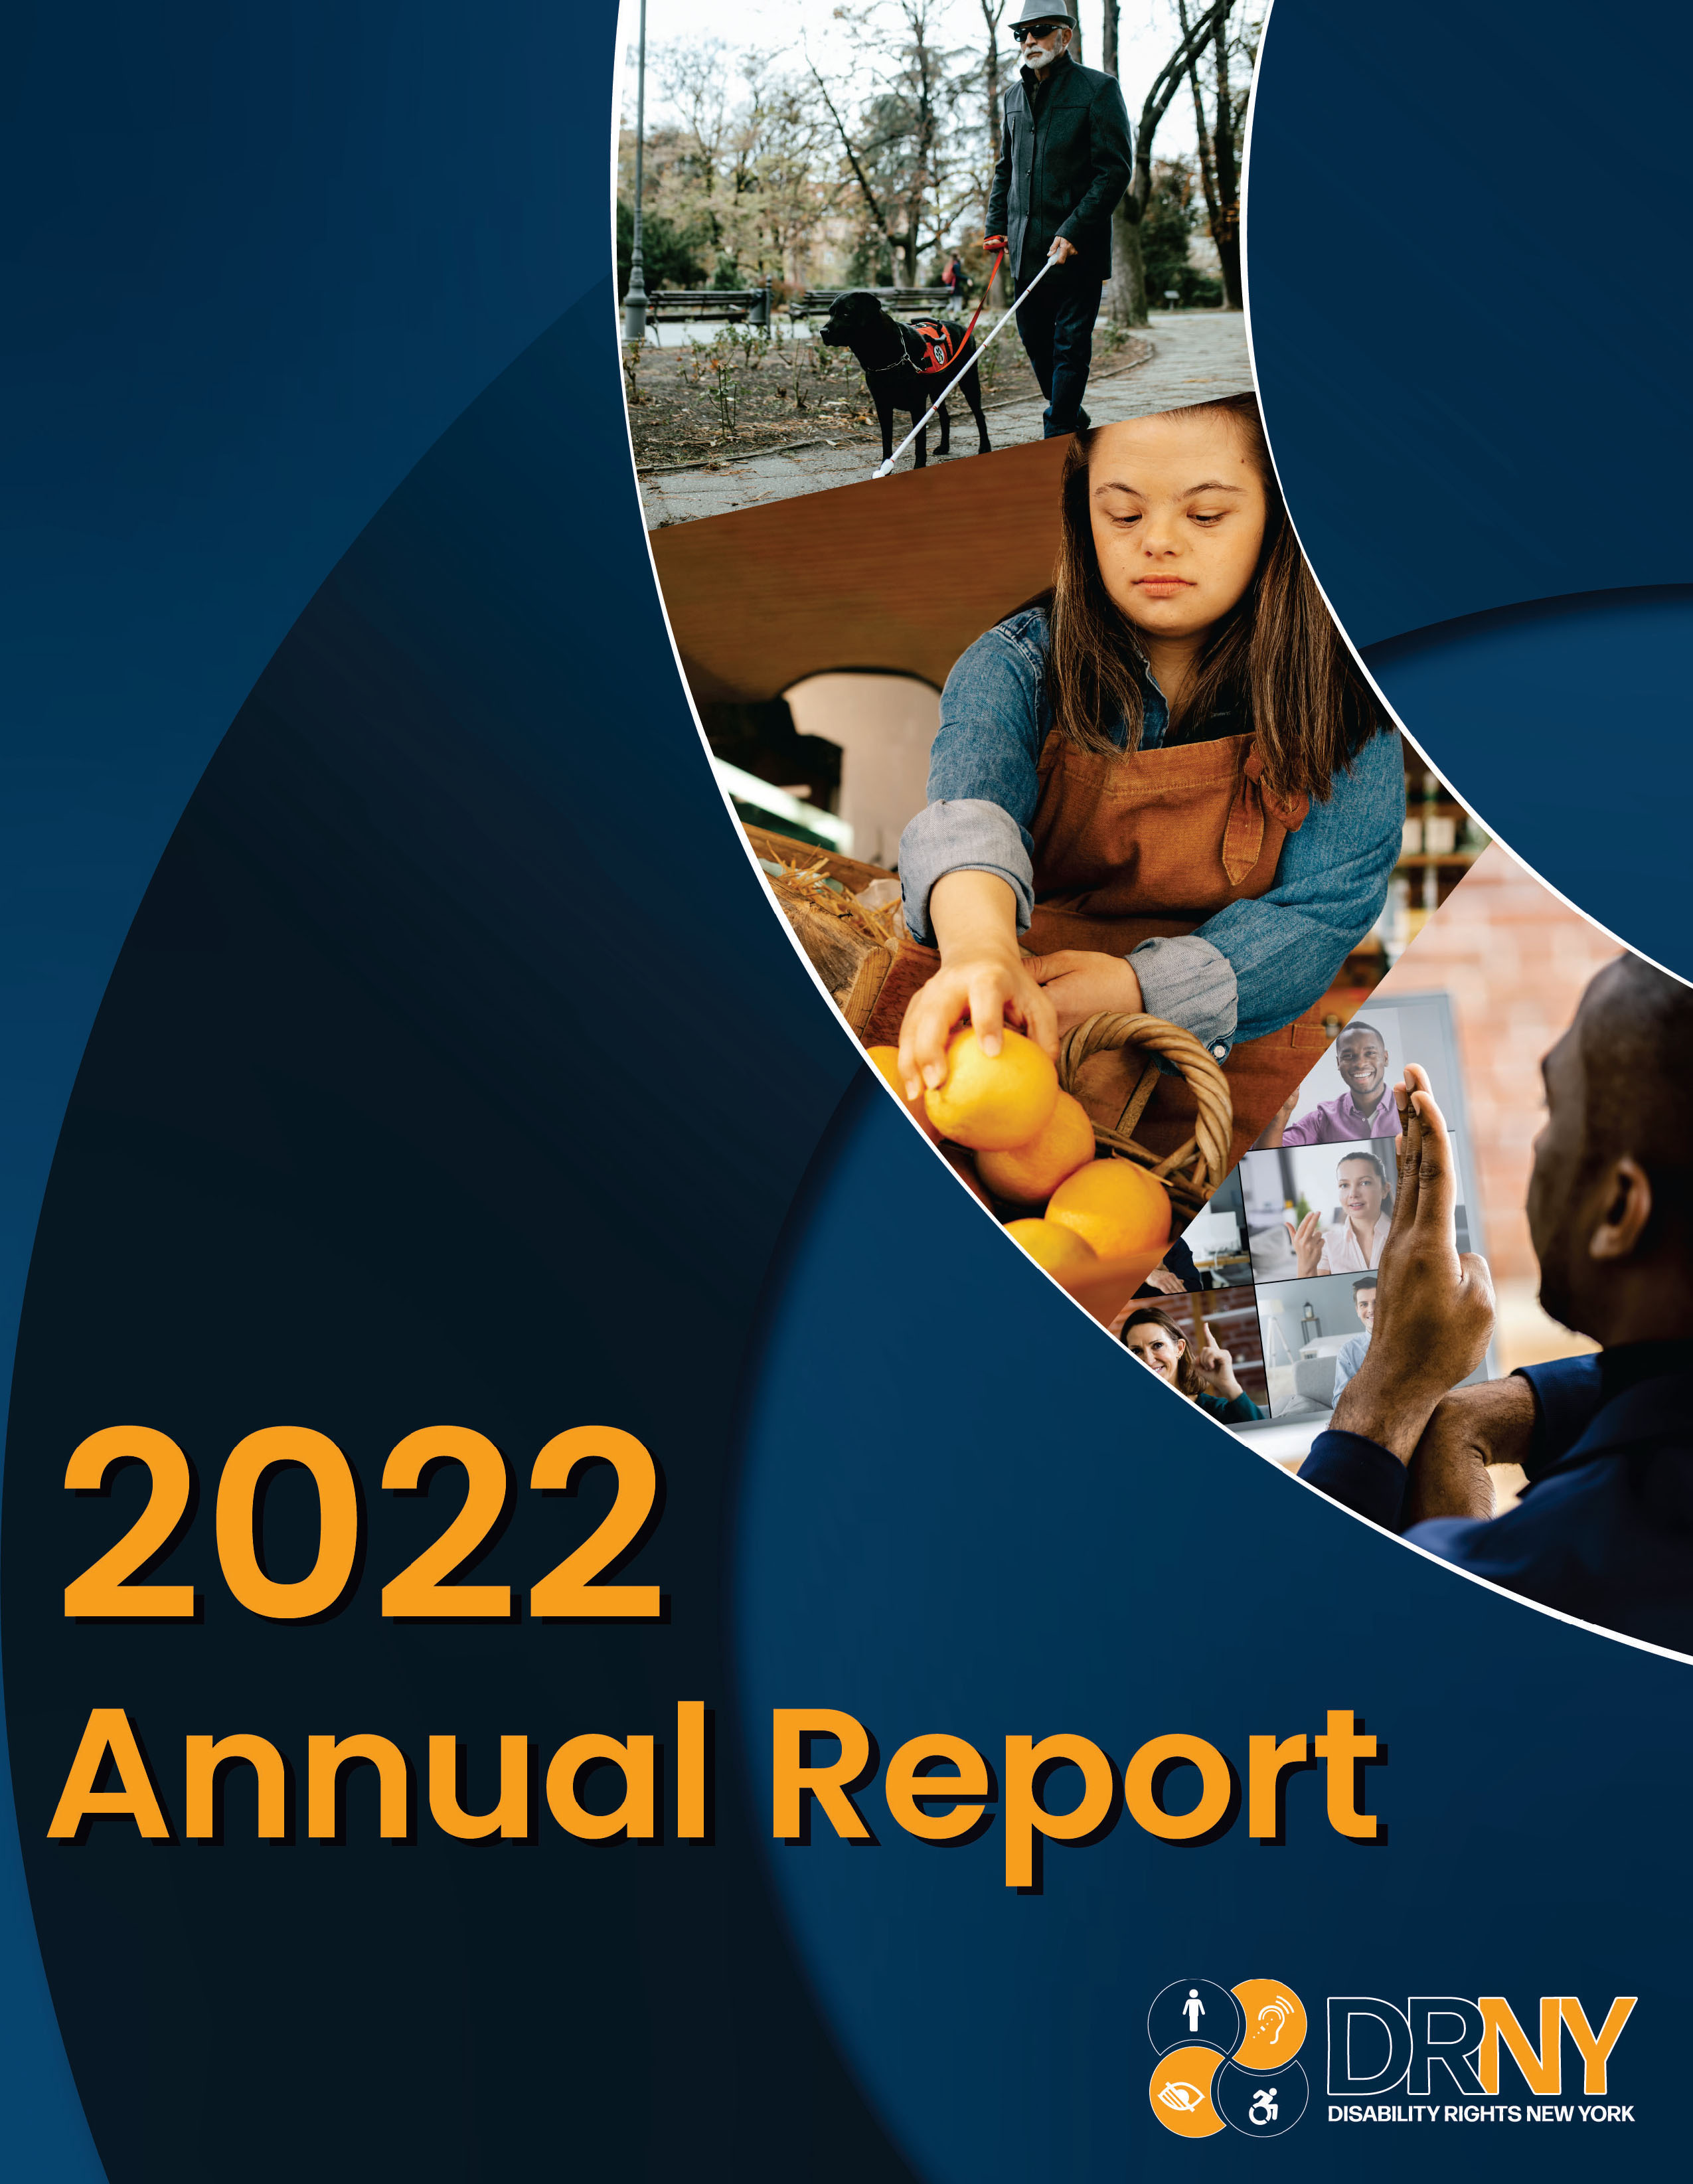 Uploaded Image: /vs-uploads/annual-report-images/2022 Annual Report cover copyn.jpg